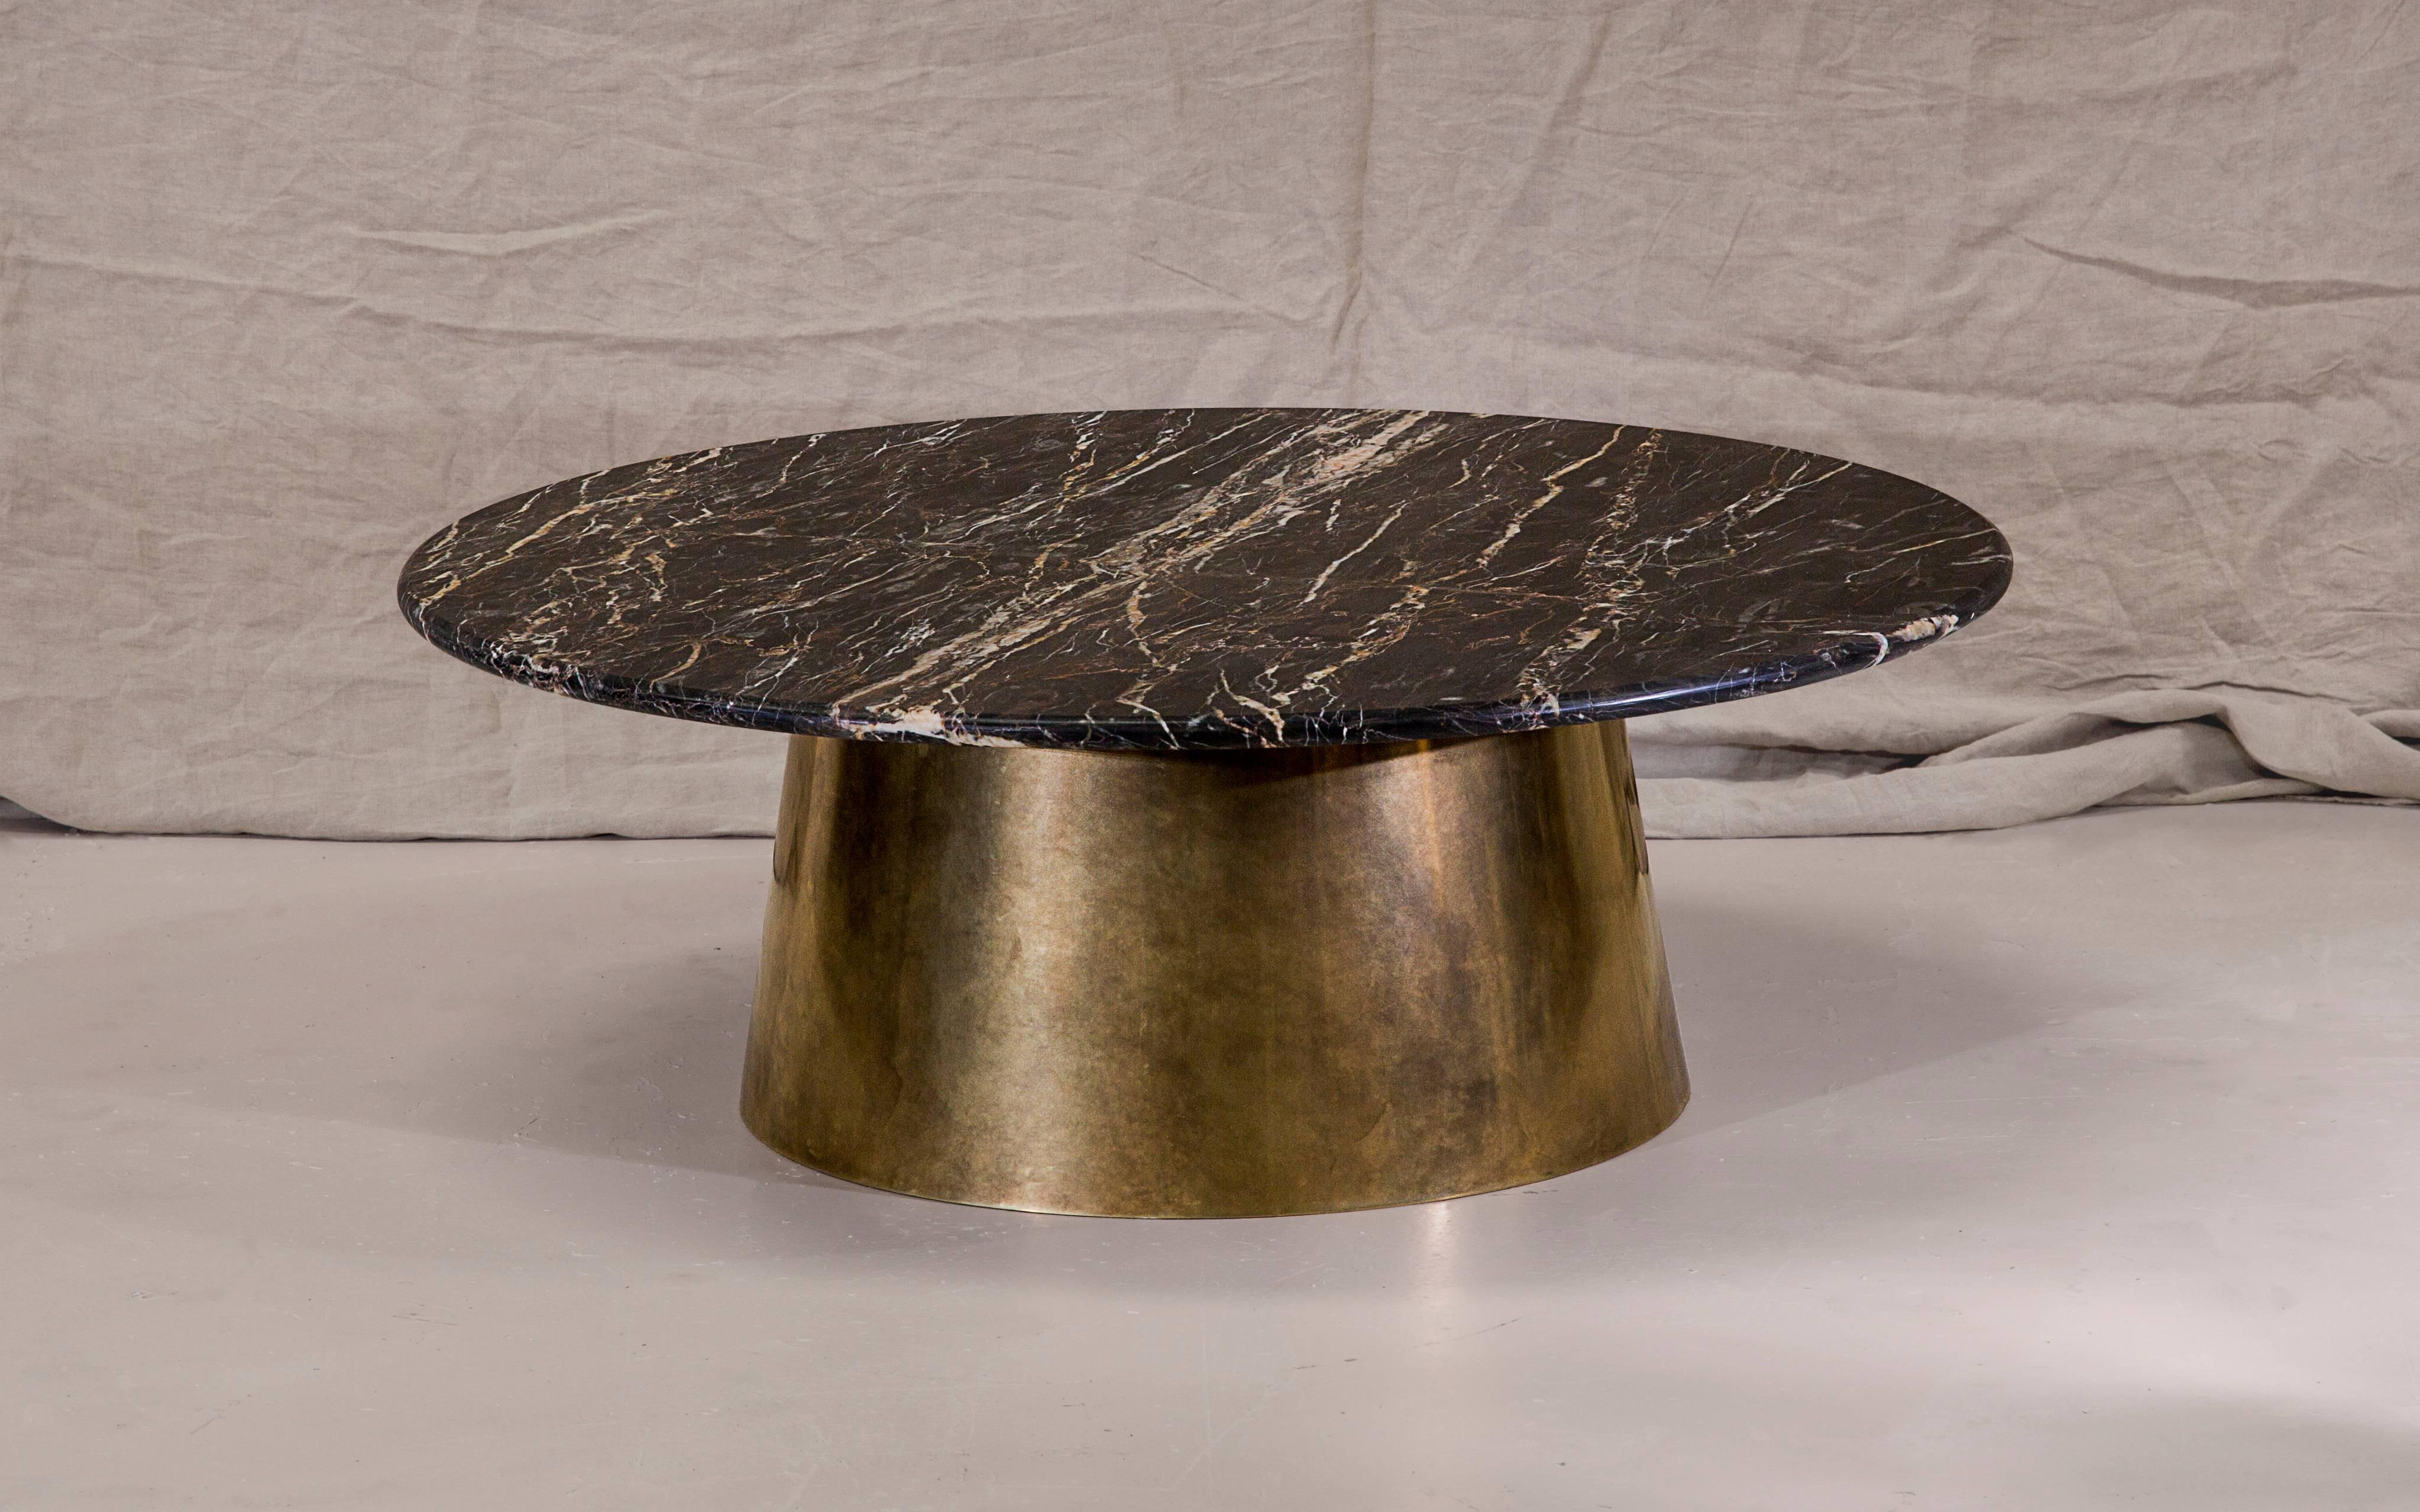 A circular coffee table in incredibly rare British marble and patinated brass. Hand crafted to order in the North. 

Measures: 100cm dia x 35cm height.
Custom finishes and sizes available upon request. 

Made to order in 12 weeks.
Price